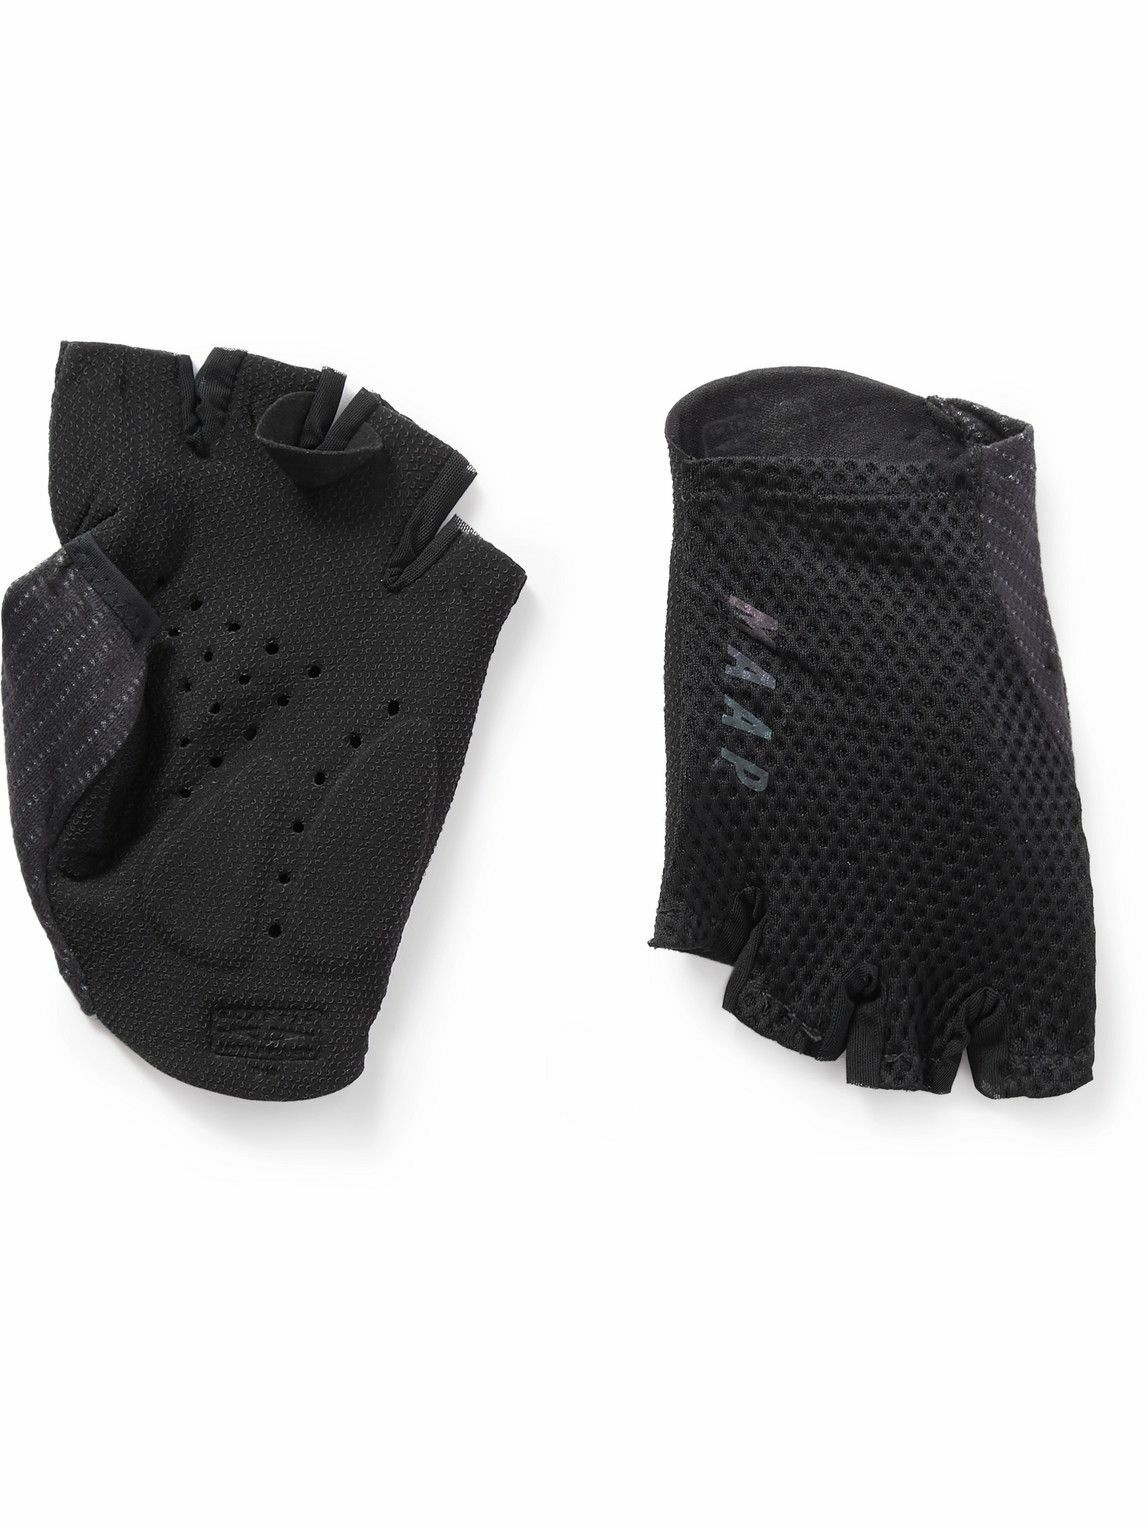 Photo: MAAP - Pro Race Hybrid Cell System and Mesh Cycling Gloves - Black